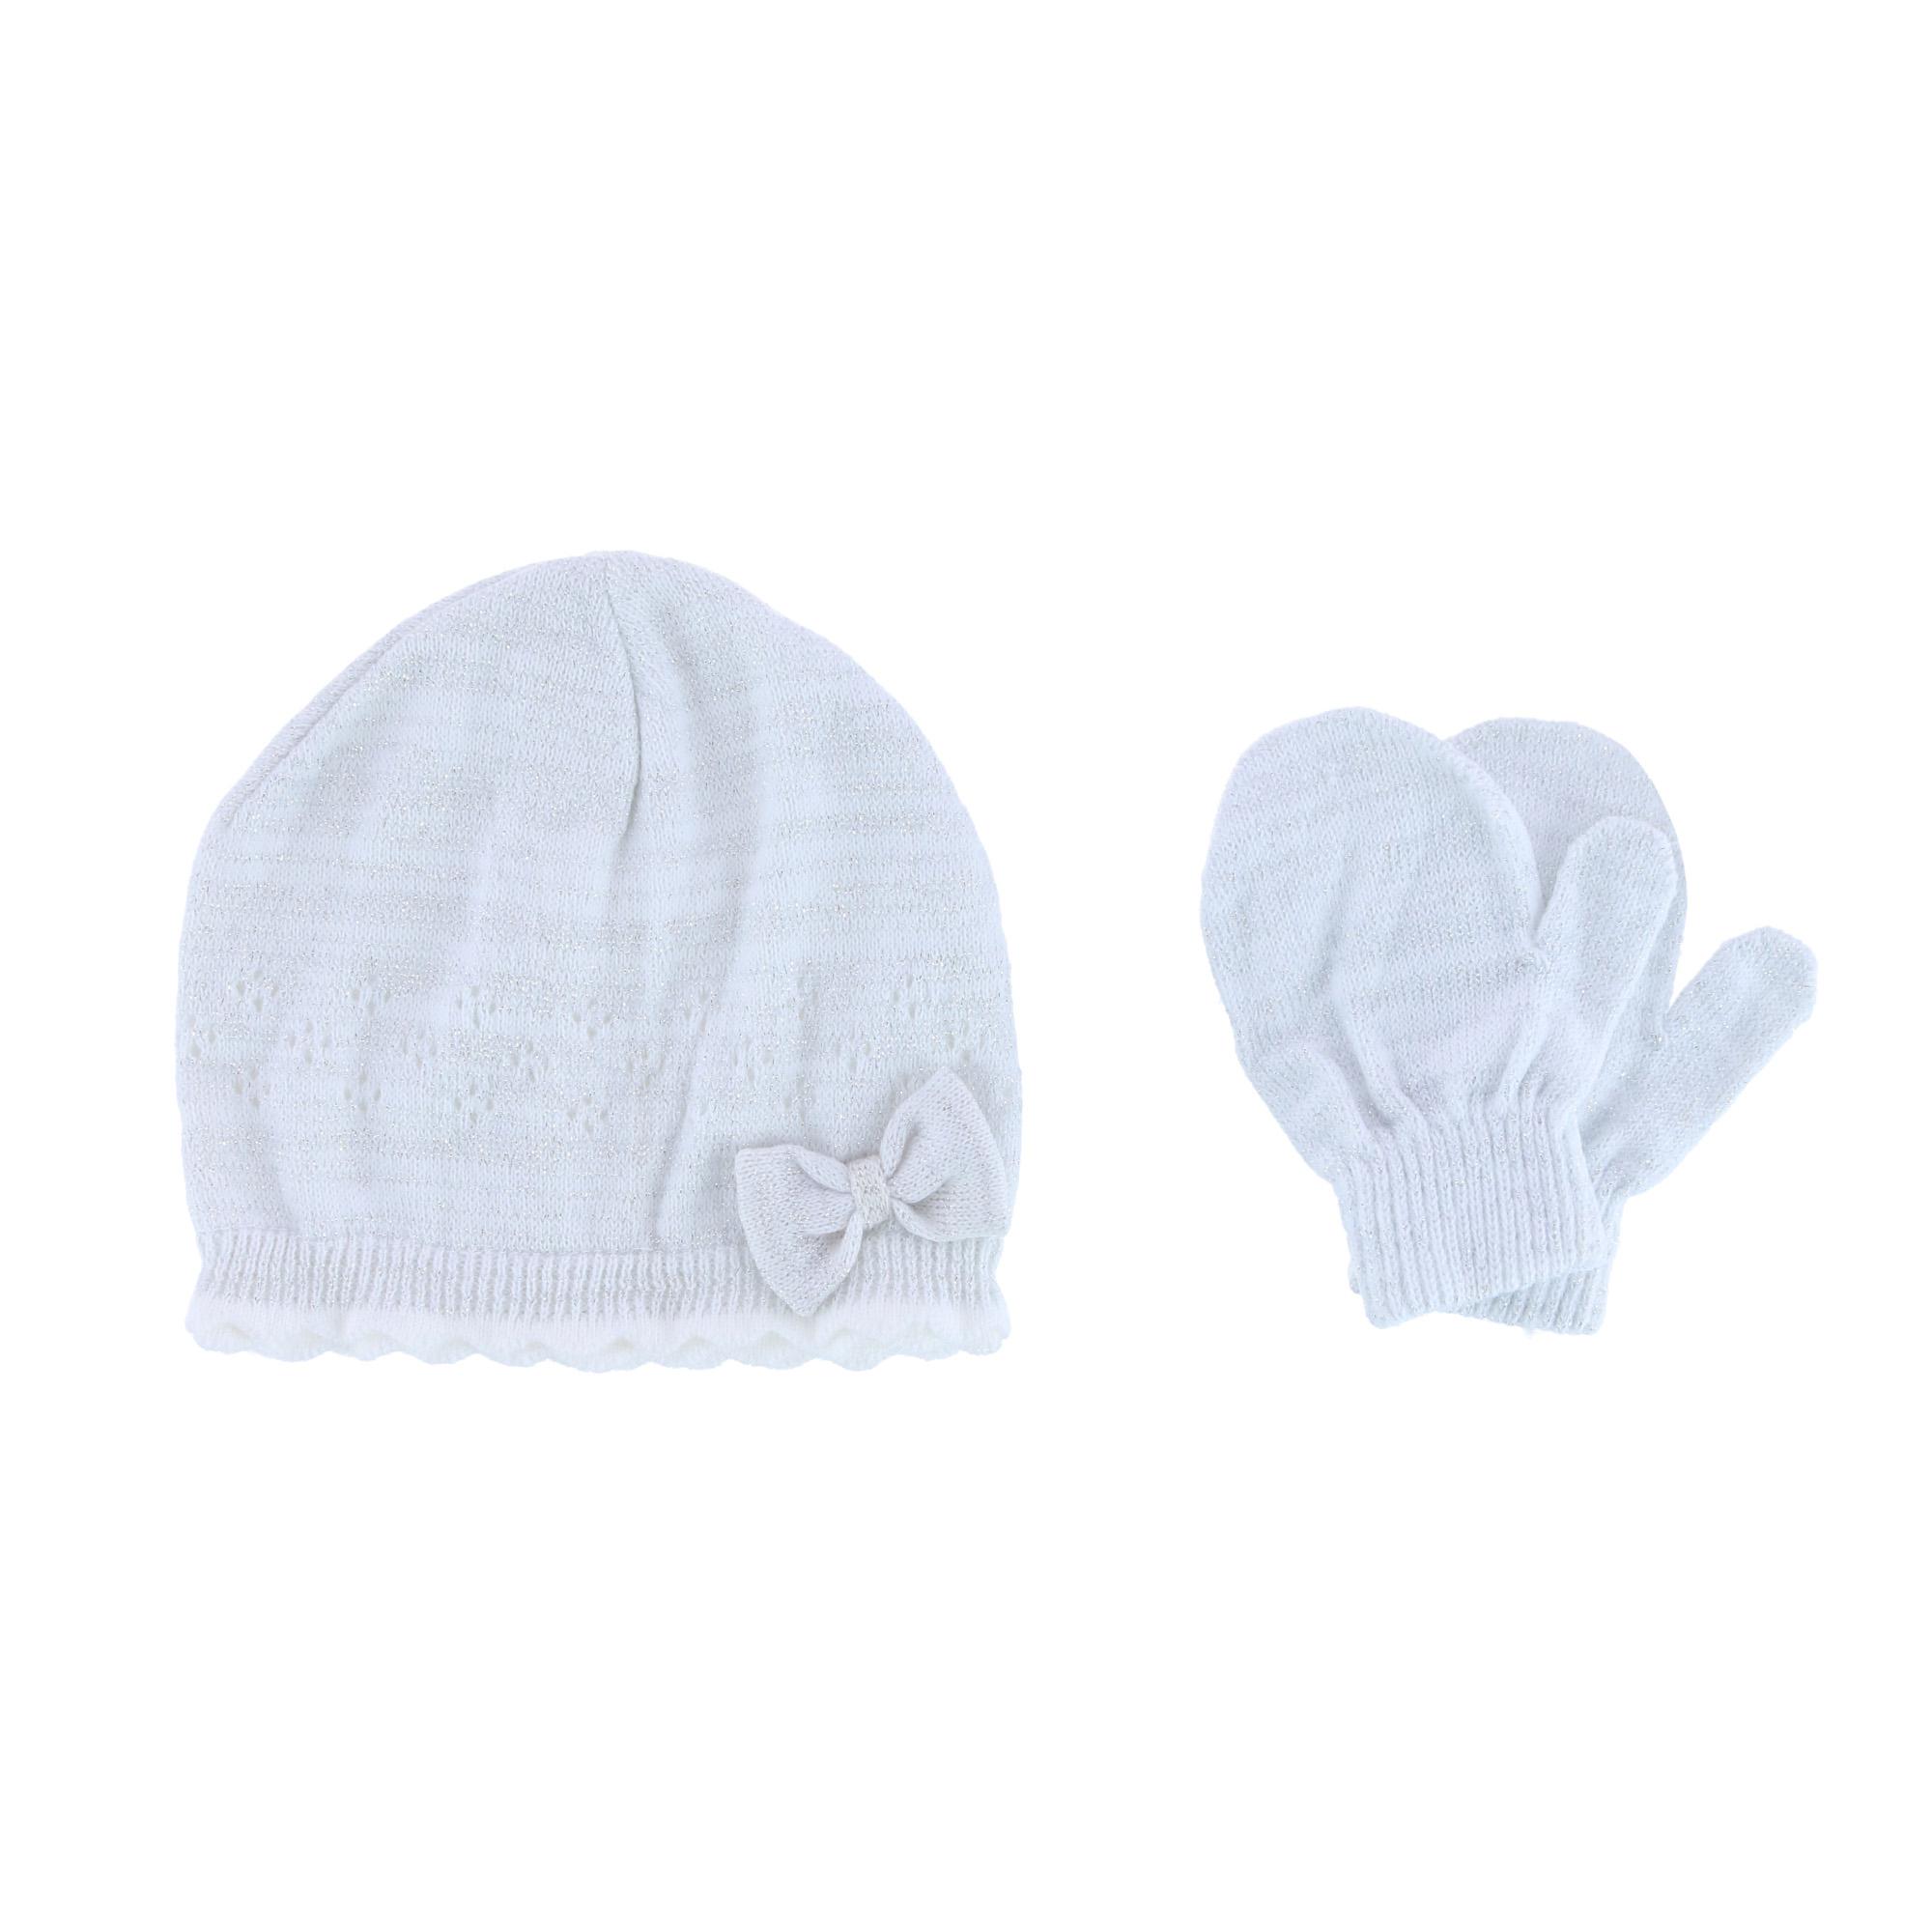 CTM Girl's Infant 0-2 Knit Beanie Hat with Bow and Mitten Set by Connex Gear